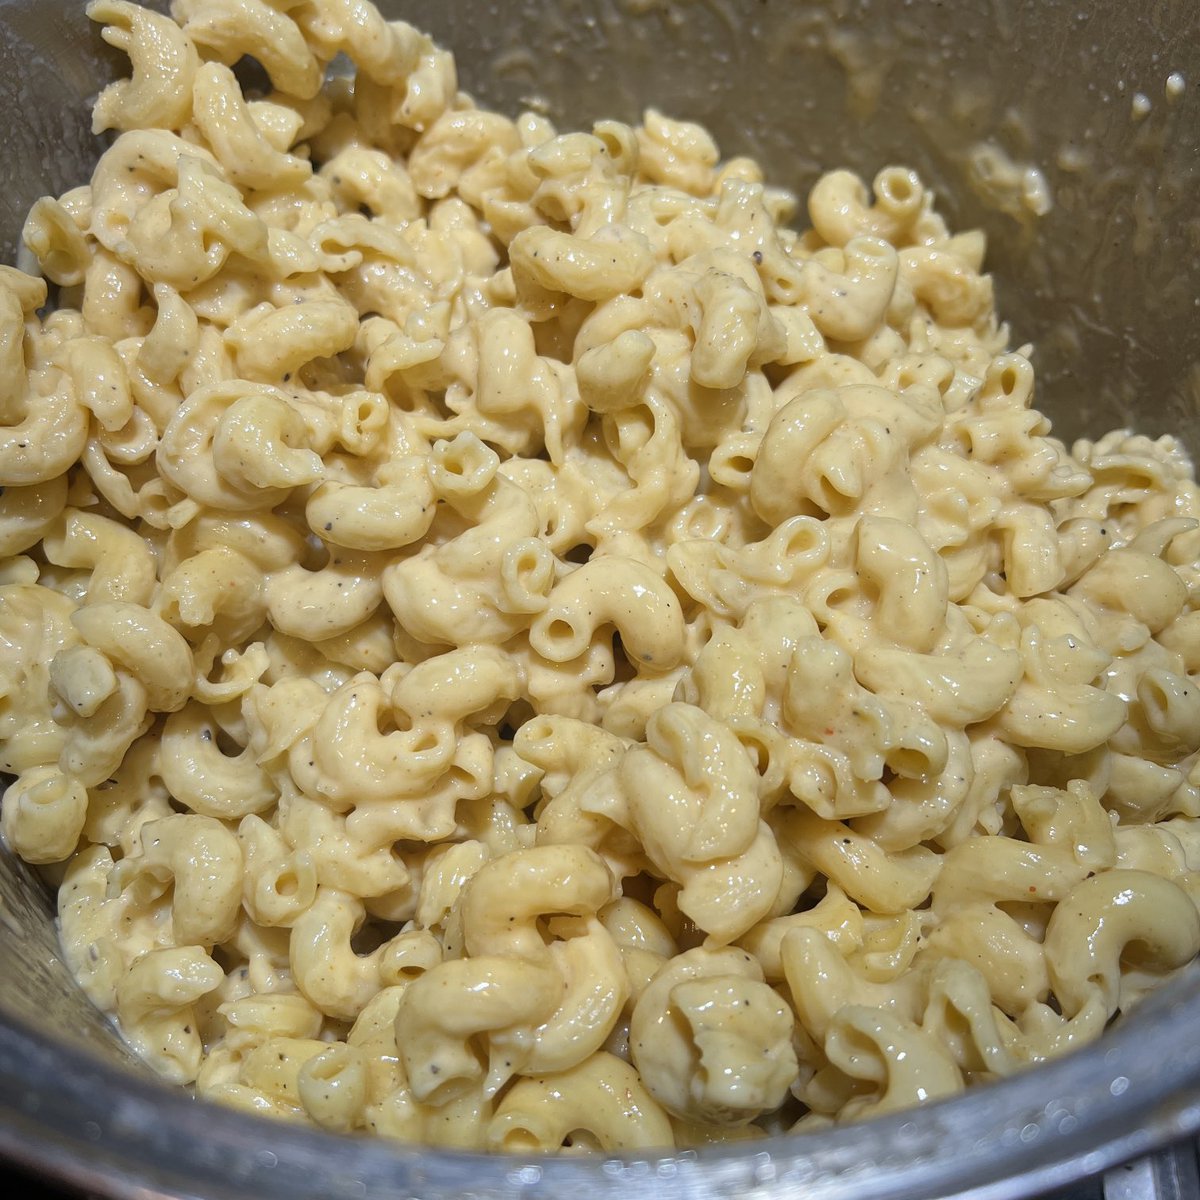 Creamy mac n cheese. Put sodium citrate in your cheese sauce and it will never break.